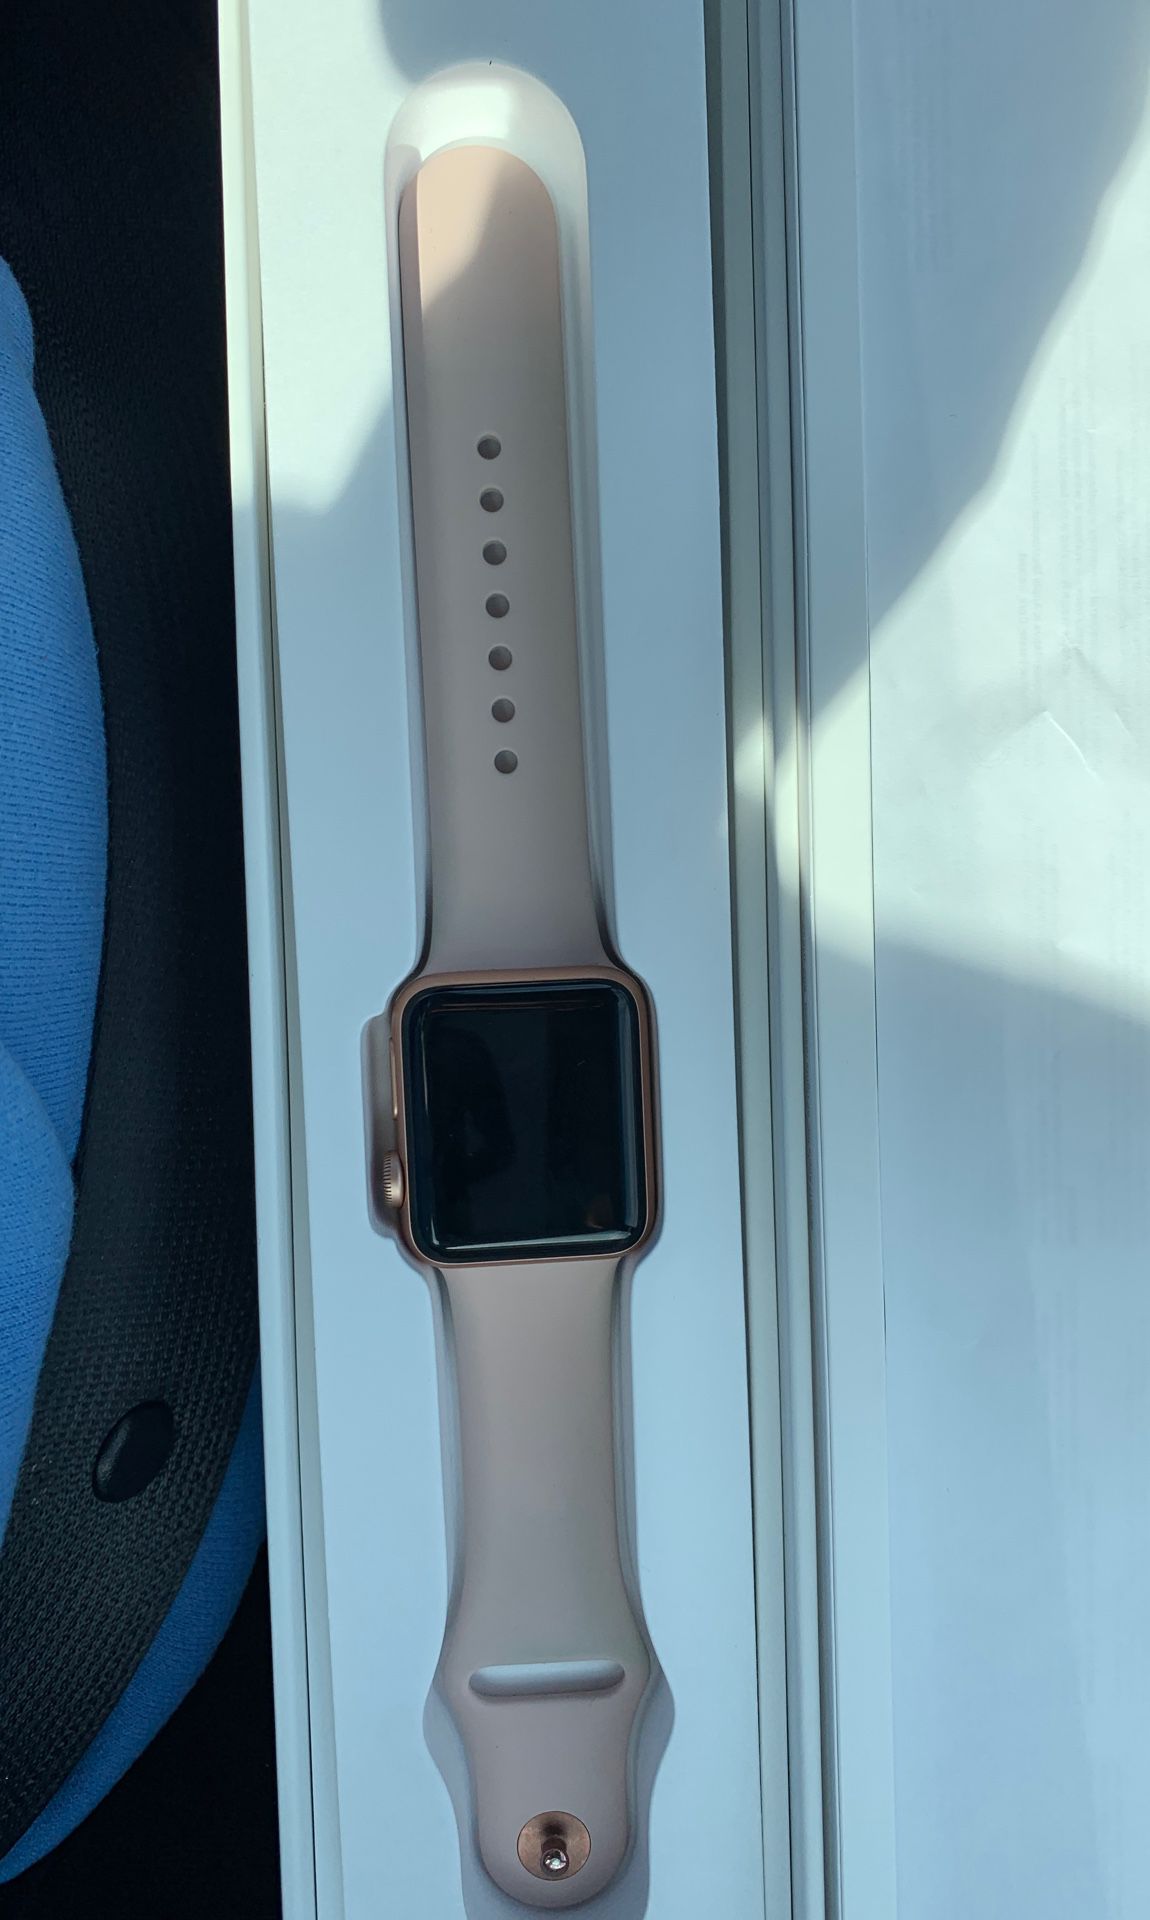 Rose Gold Apple Watch Series 3 (Everything included, used once) cash app or cash only no scams